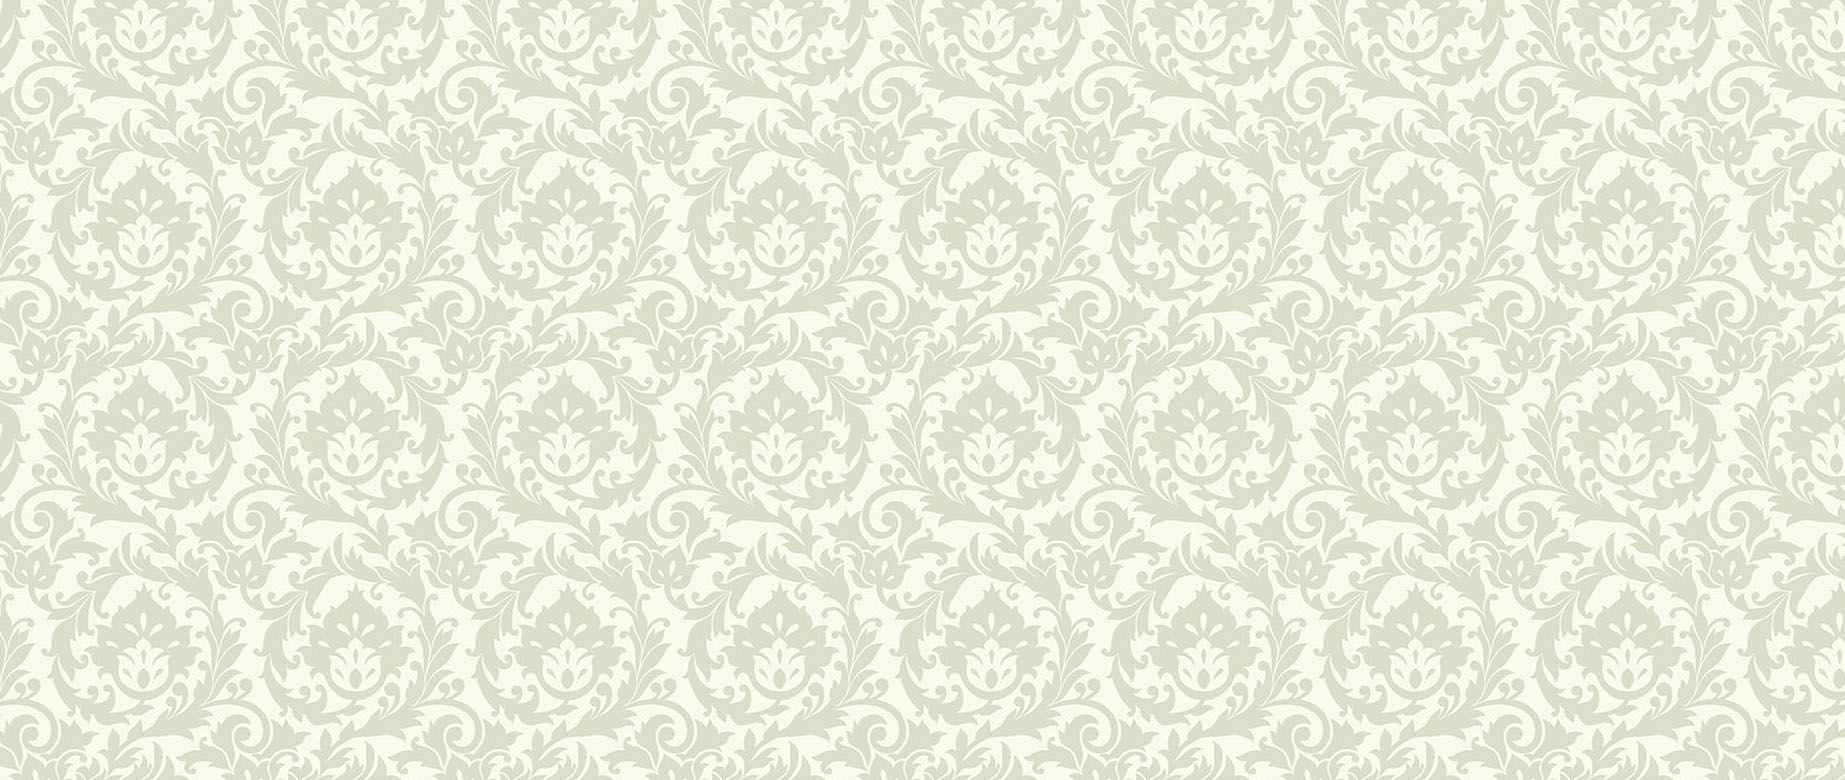 leafy-round-damask-wallpaper-seamless-repeat-view